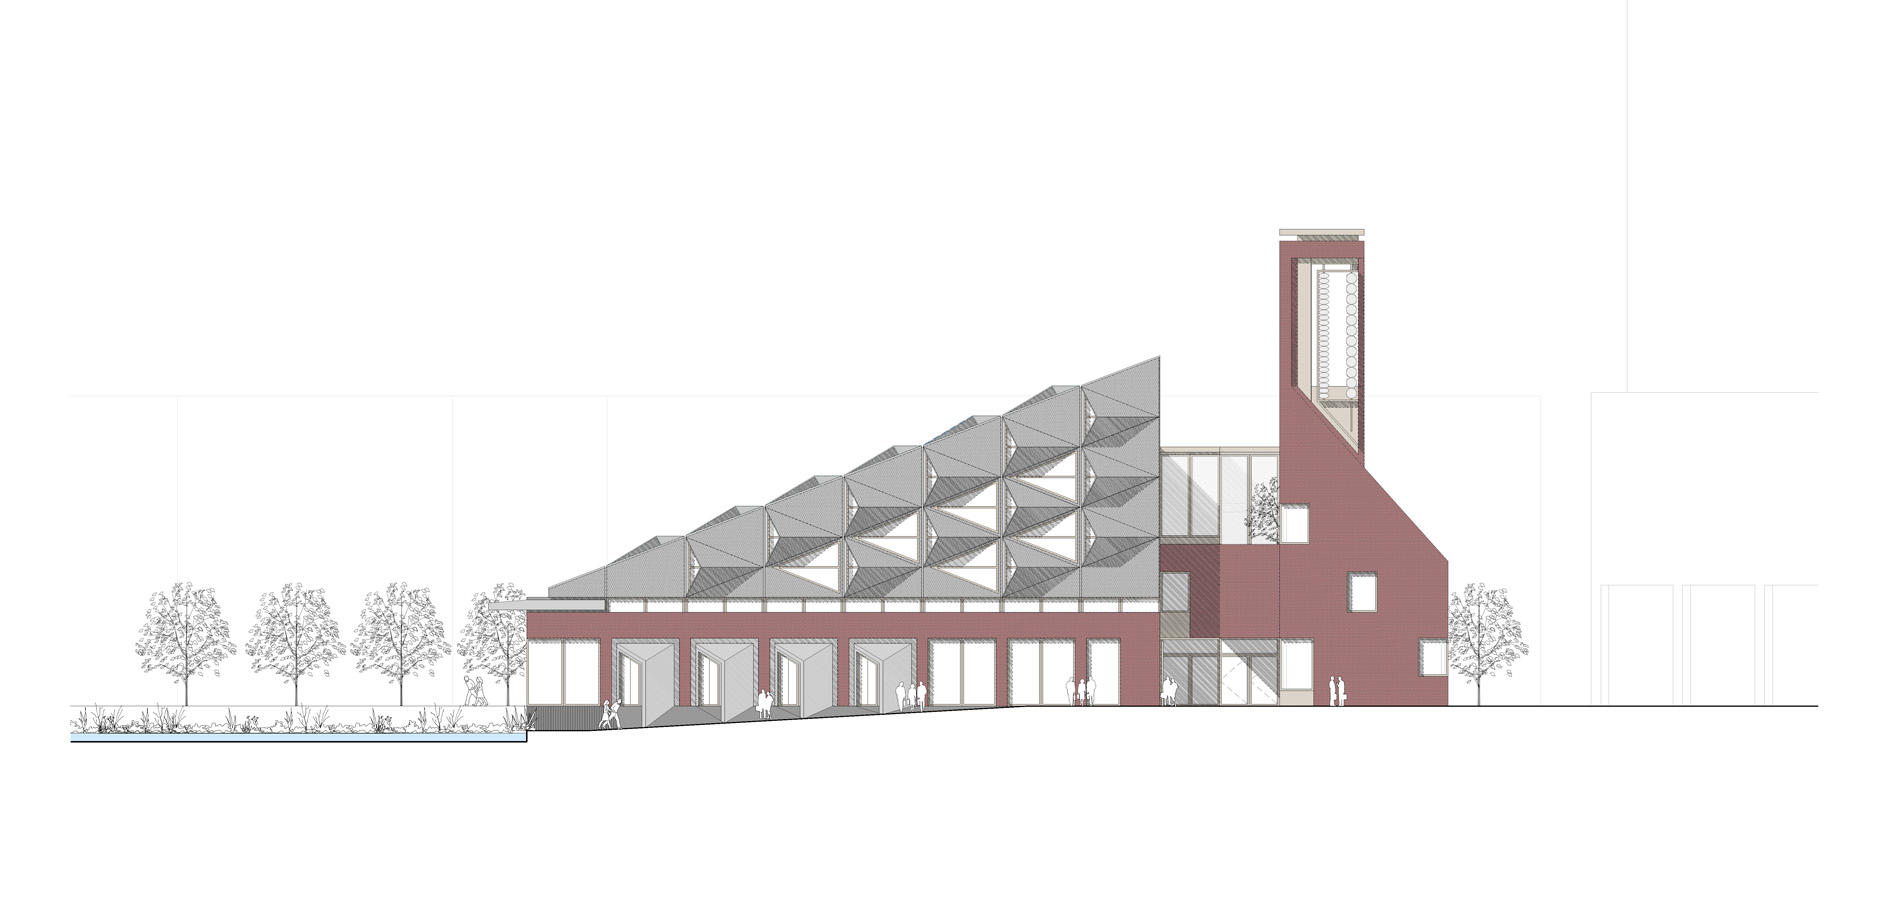 Elevation of the proposed new Southmere Village Library